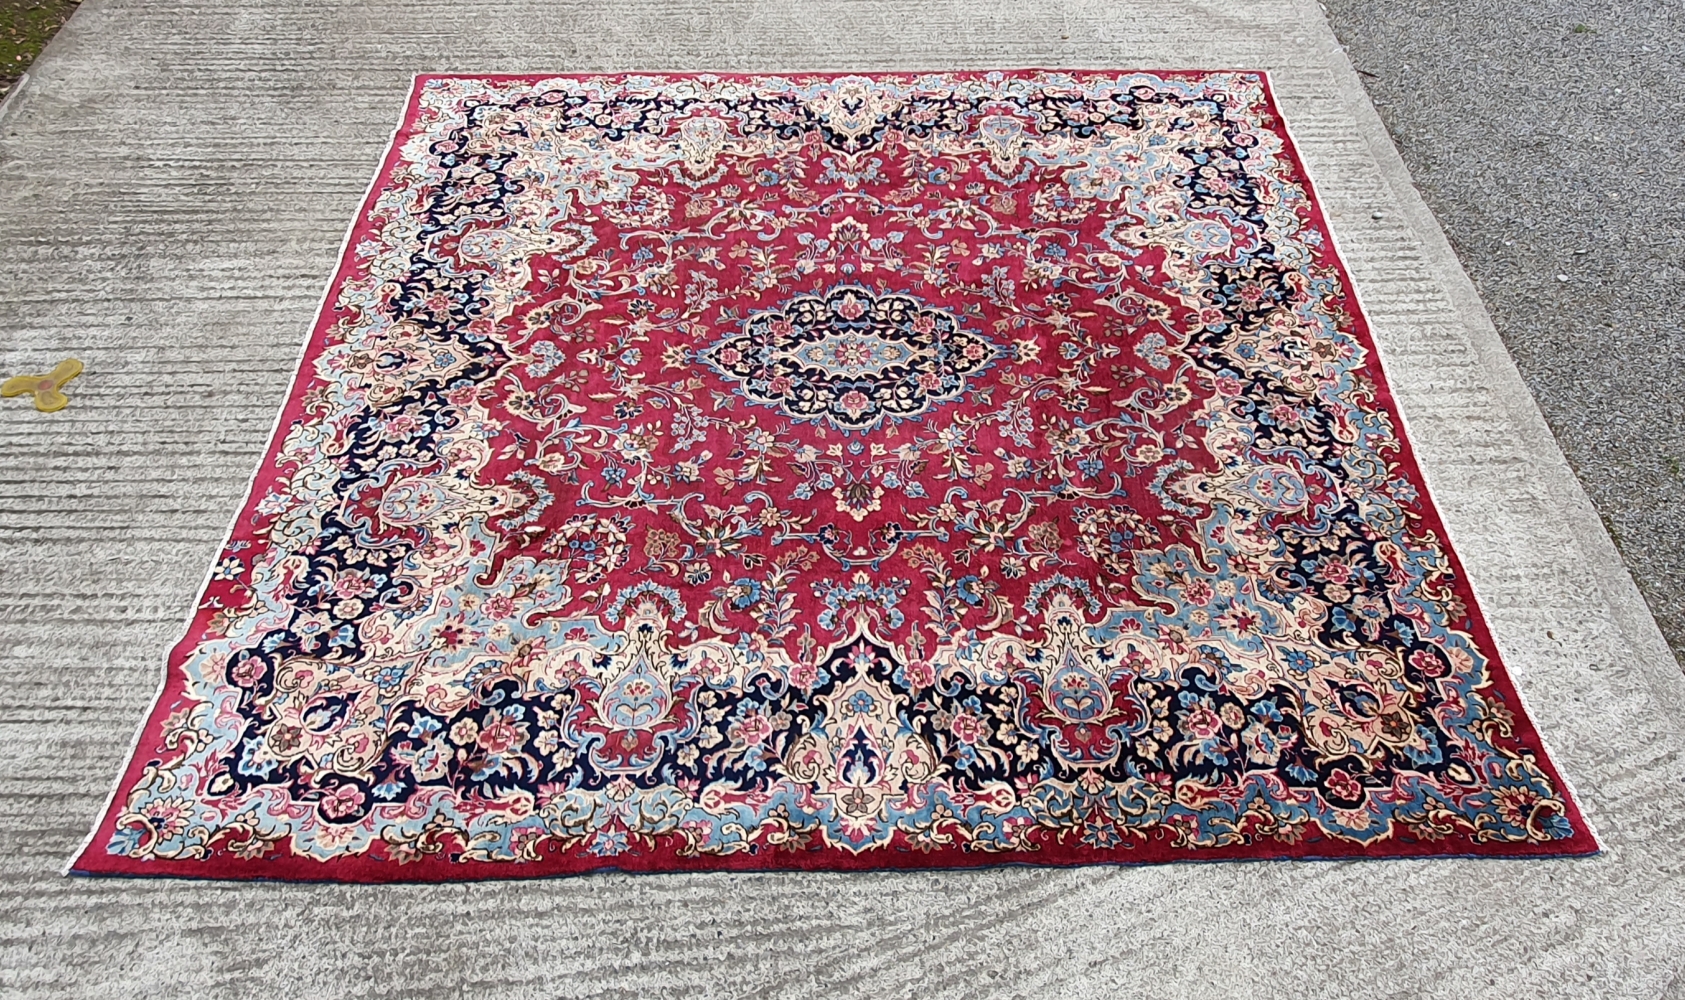 A QUALITY VINTAGE HAND KNOTTED KIRMAN PERSIAN RUG, 308cm x 302cm approx - Image 2 of 2